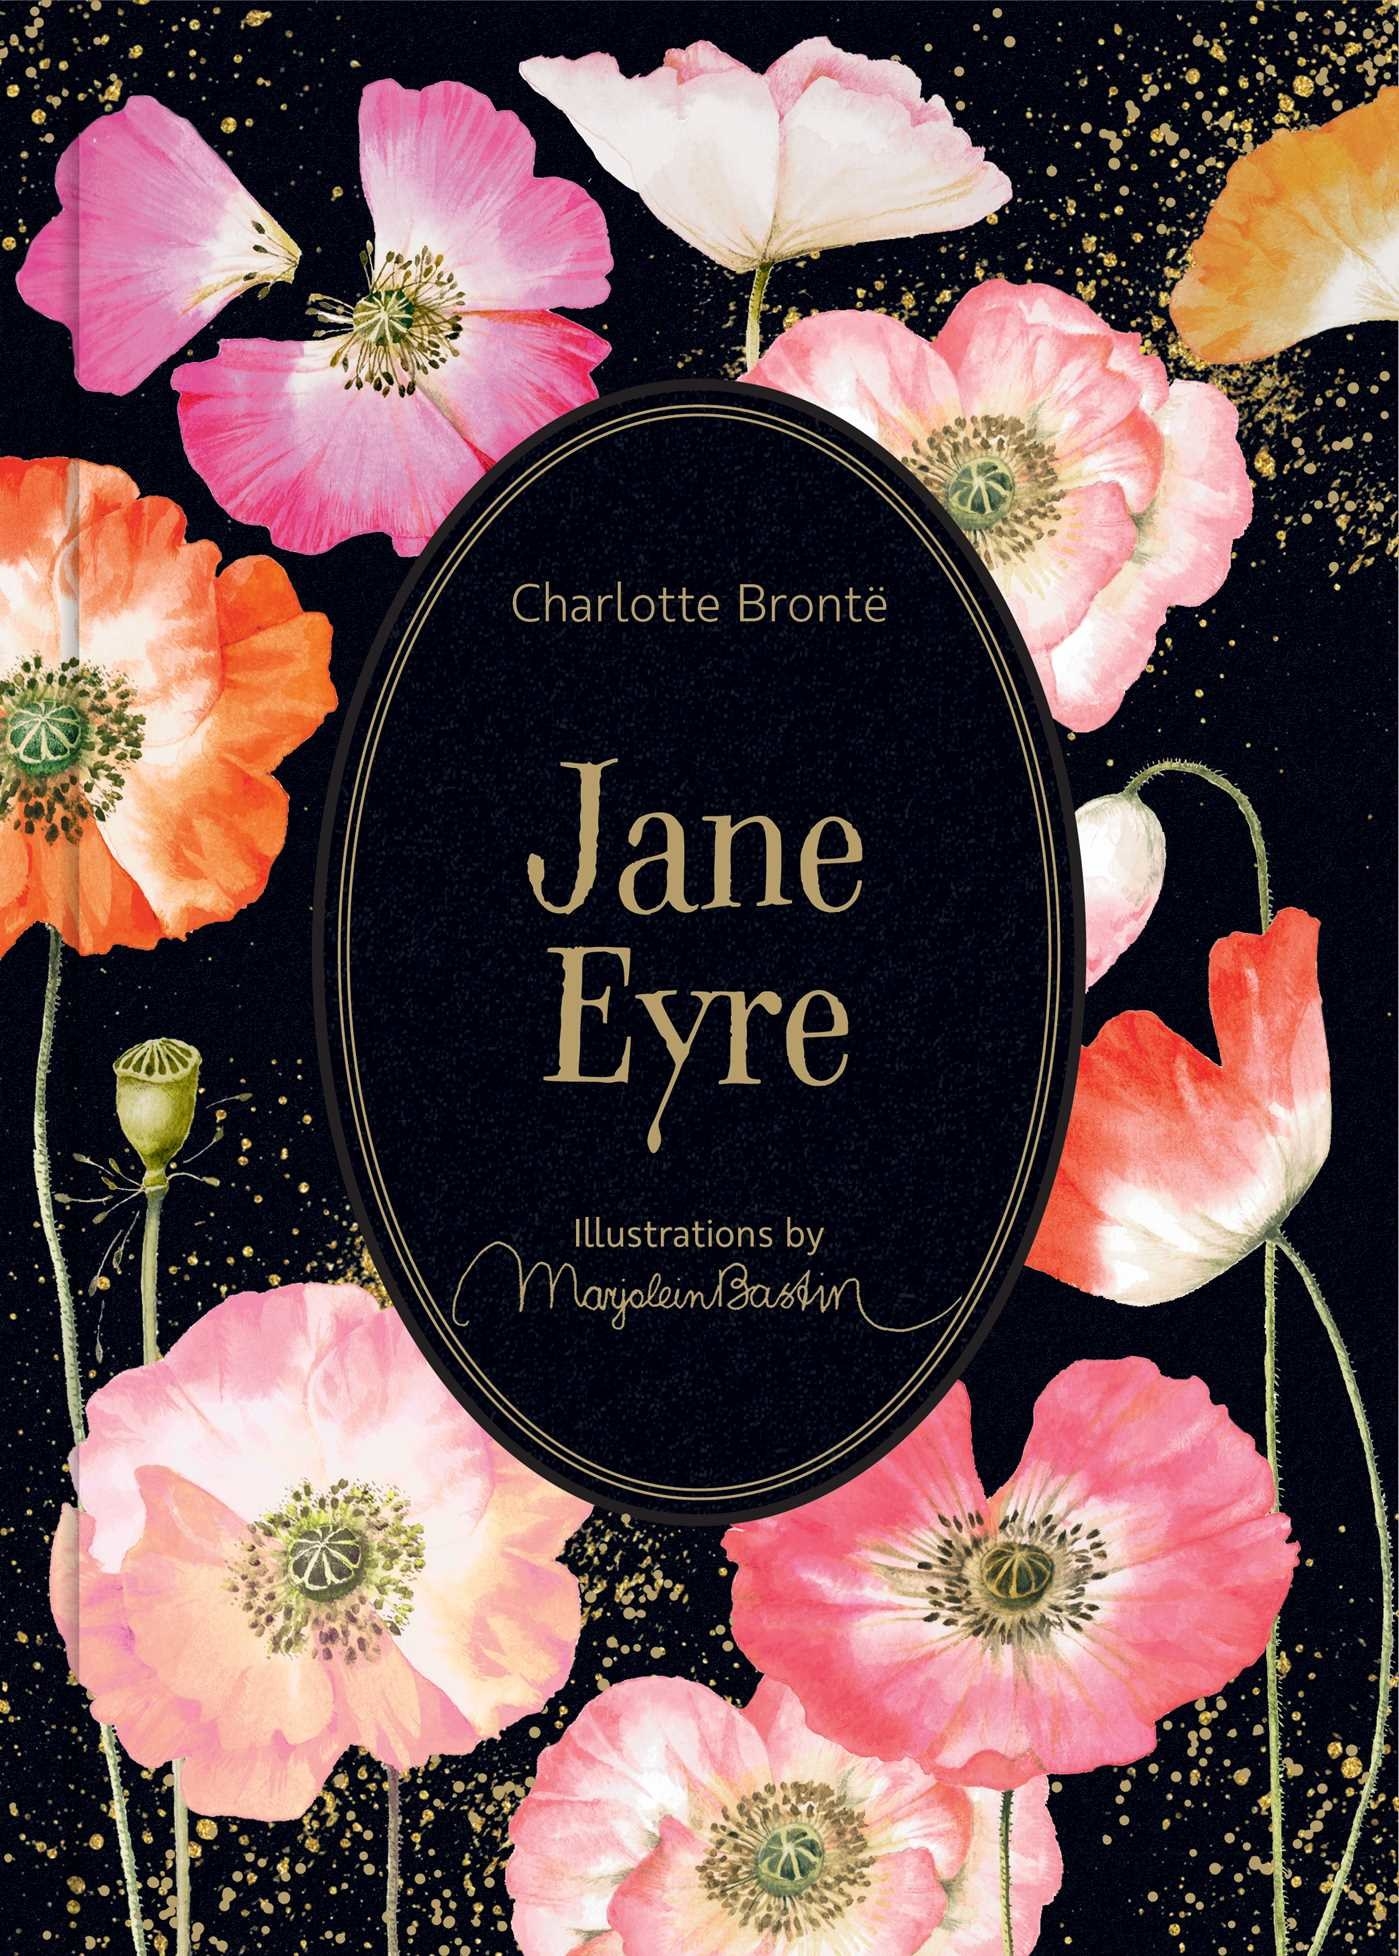 The book cover with flowers